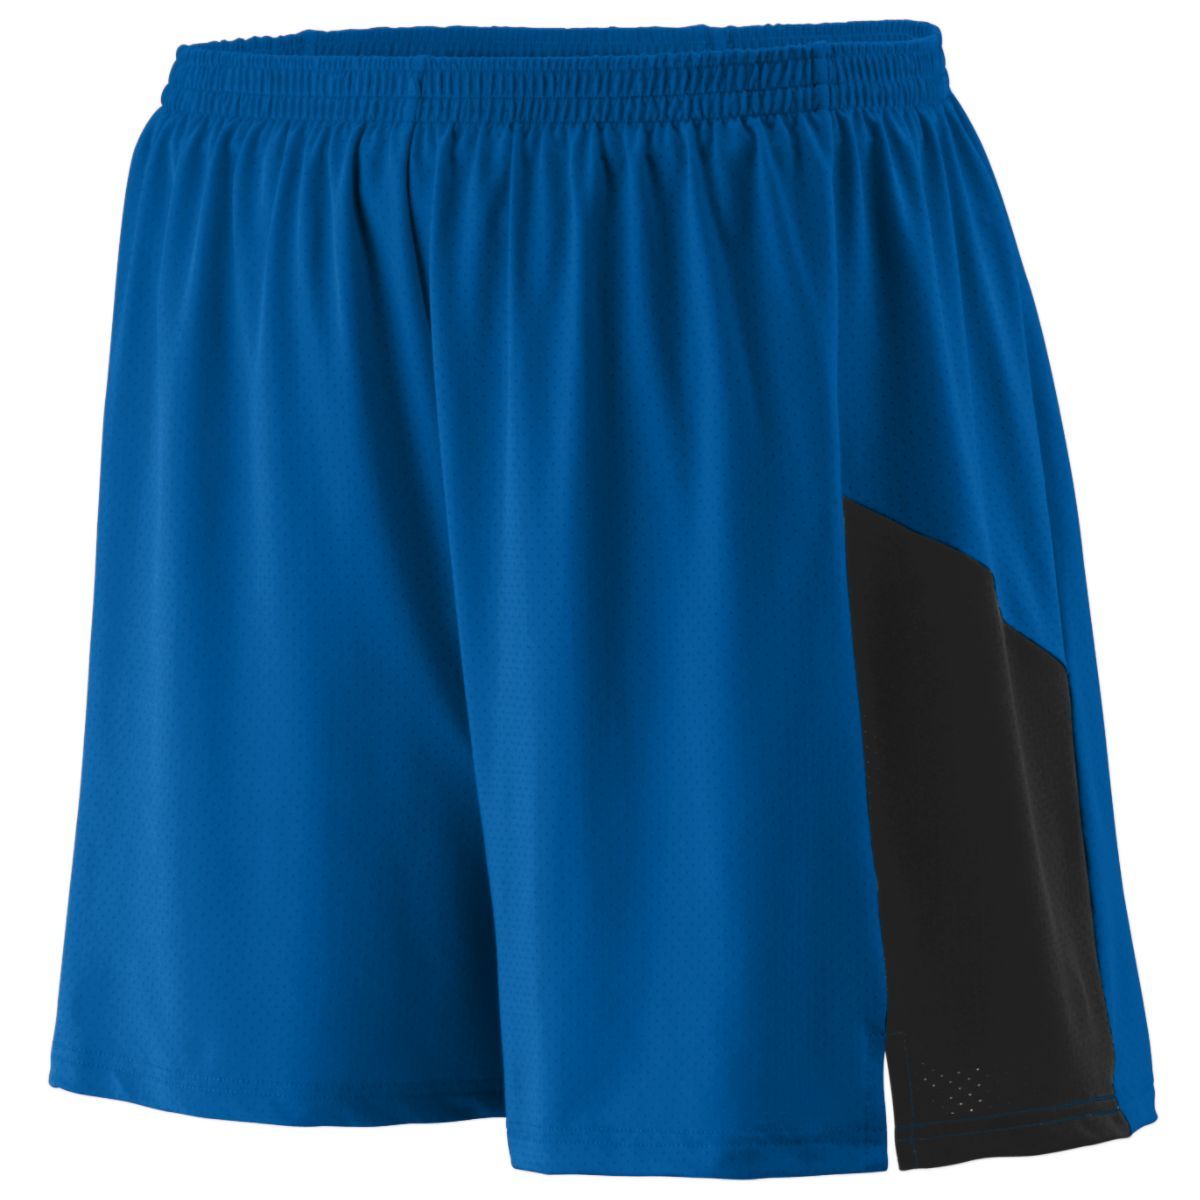 Augusta Sportswear Sprint Shorts in Royal/Black  -Part of the Adult, Adult-Shorts, Augusta-Products, Track-Field product lines at KanaleyCreations.com